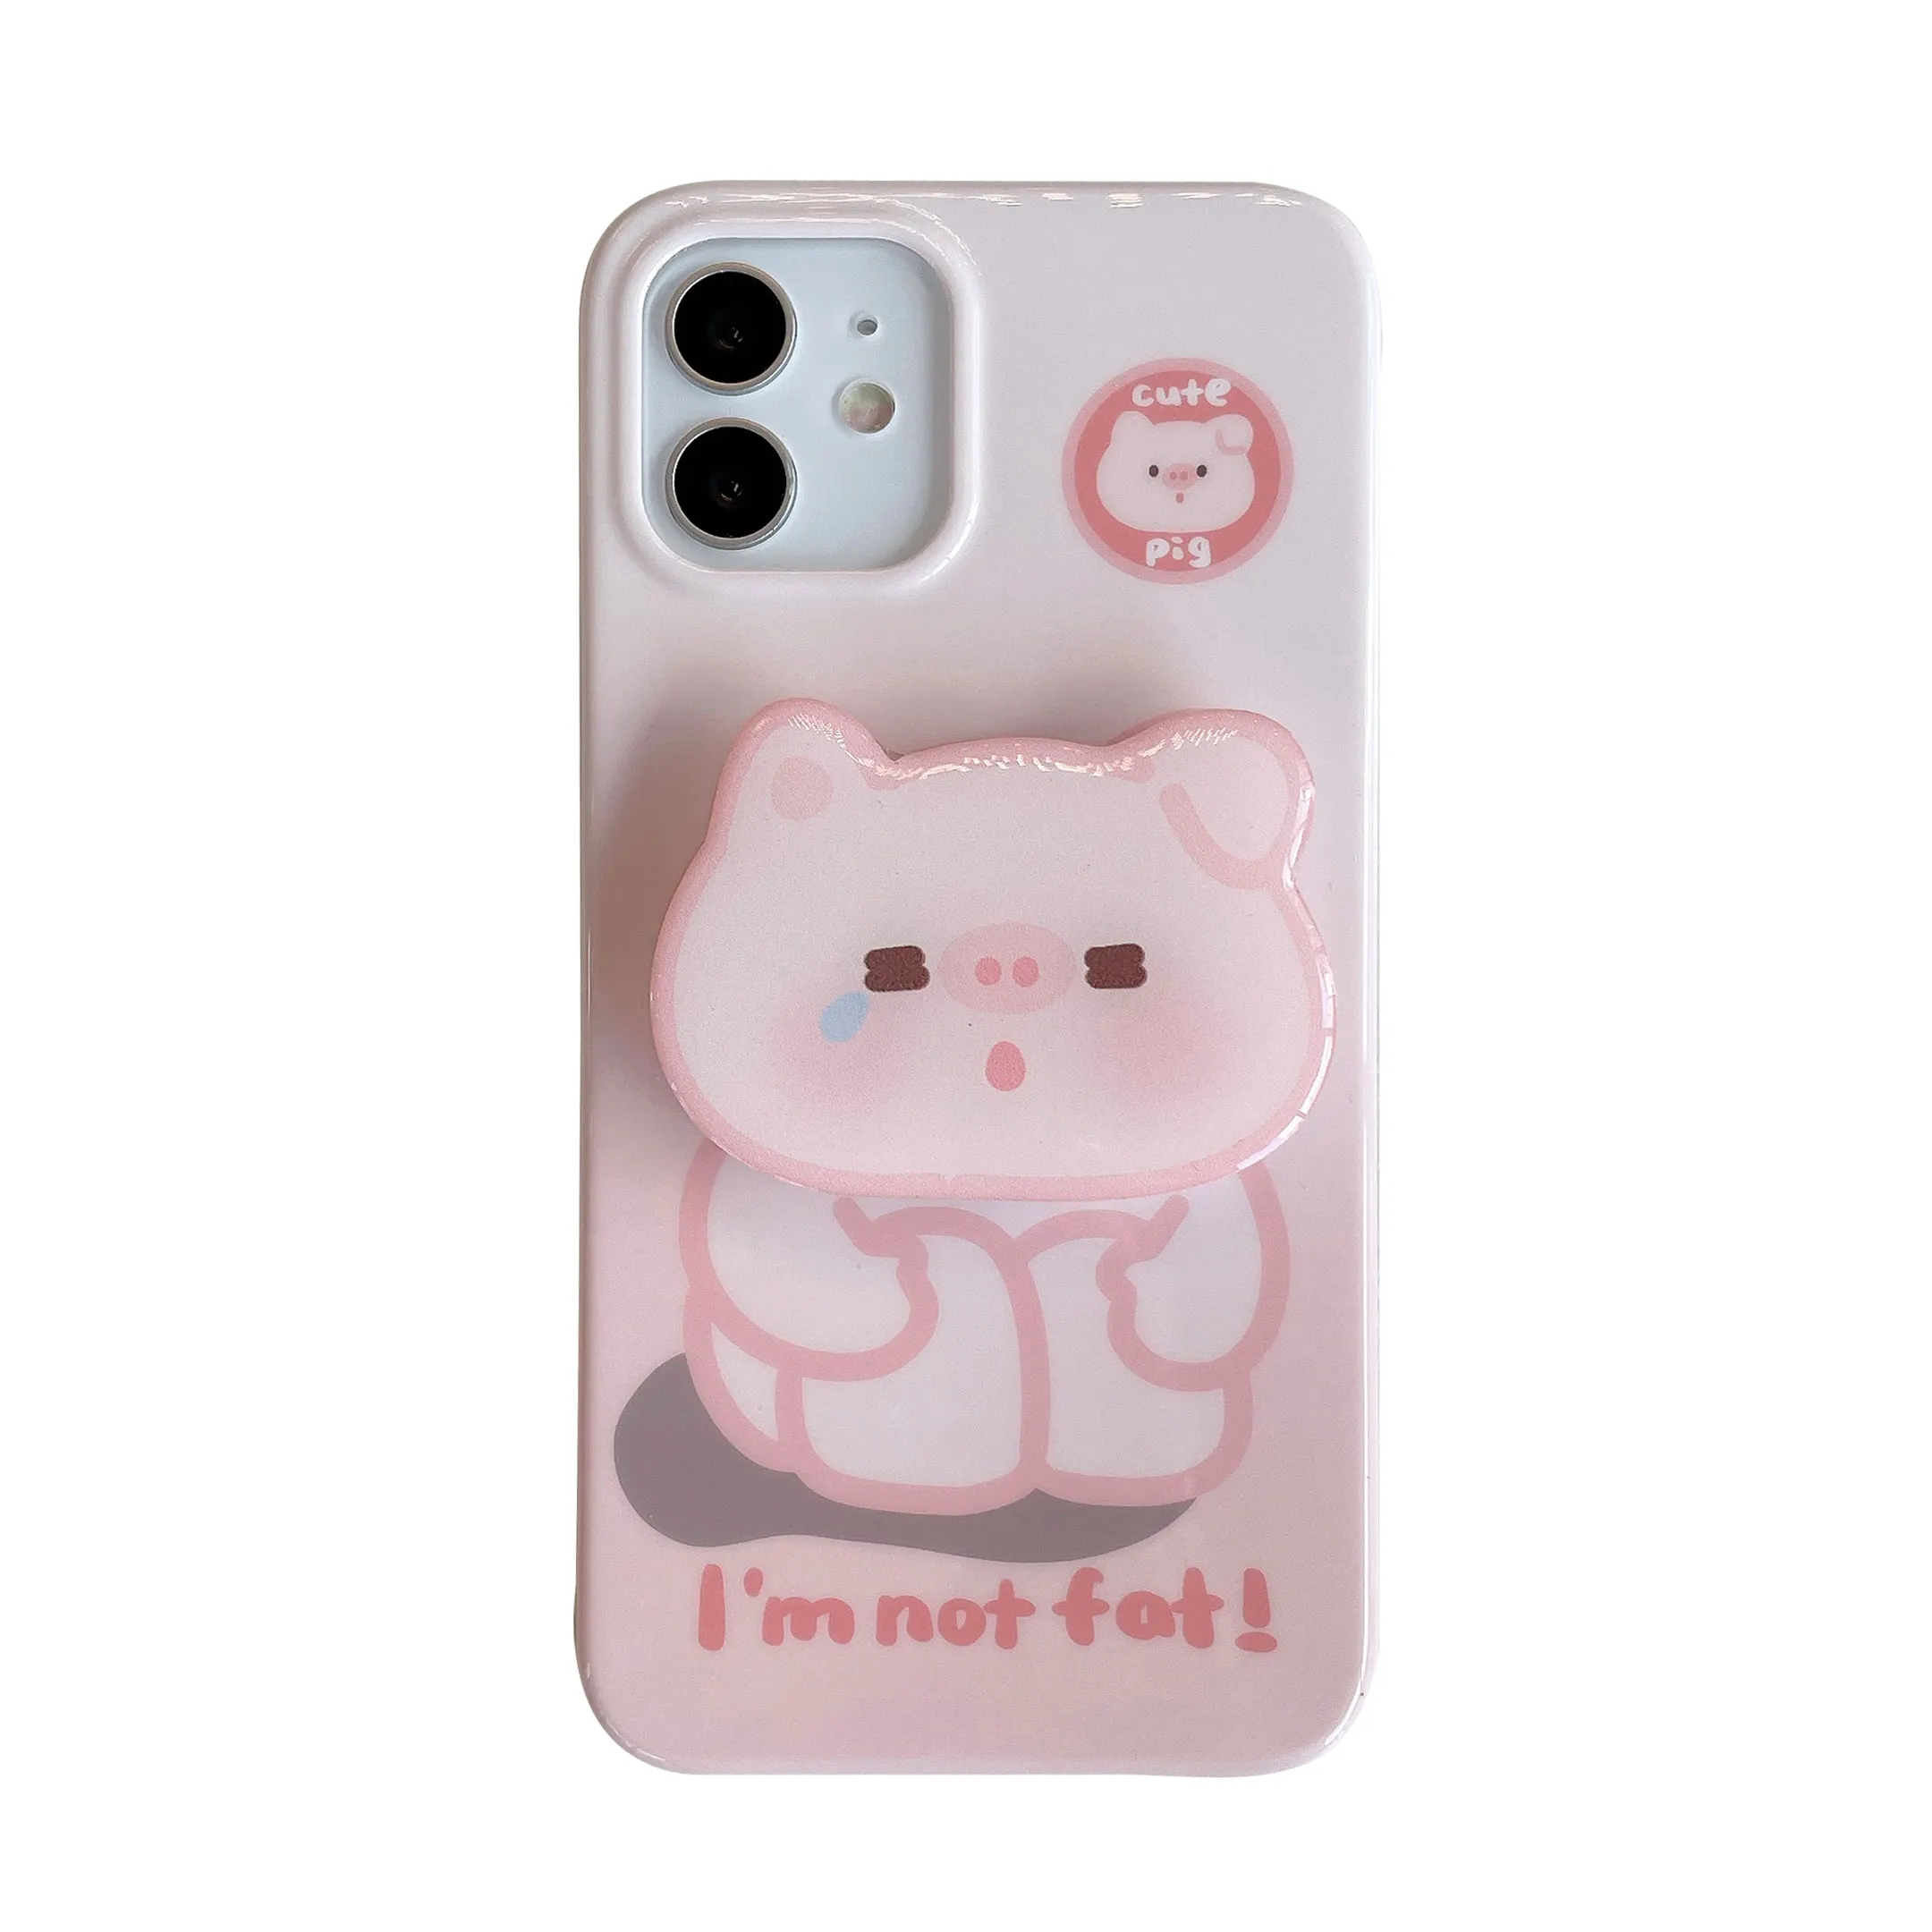 

Cute Pig Airbag Phone Holders For iPhone 12pro Max 11Pro For iPhoneX XR XsMax iPhone 6 6s i7 i8 2020 SE 7 8plus Pink Phone case